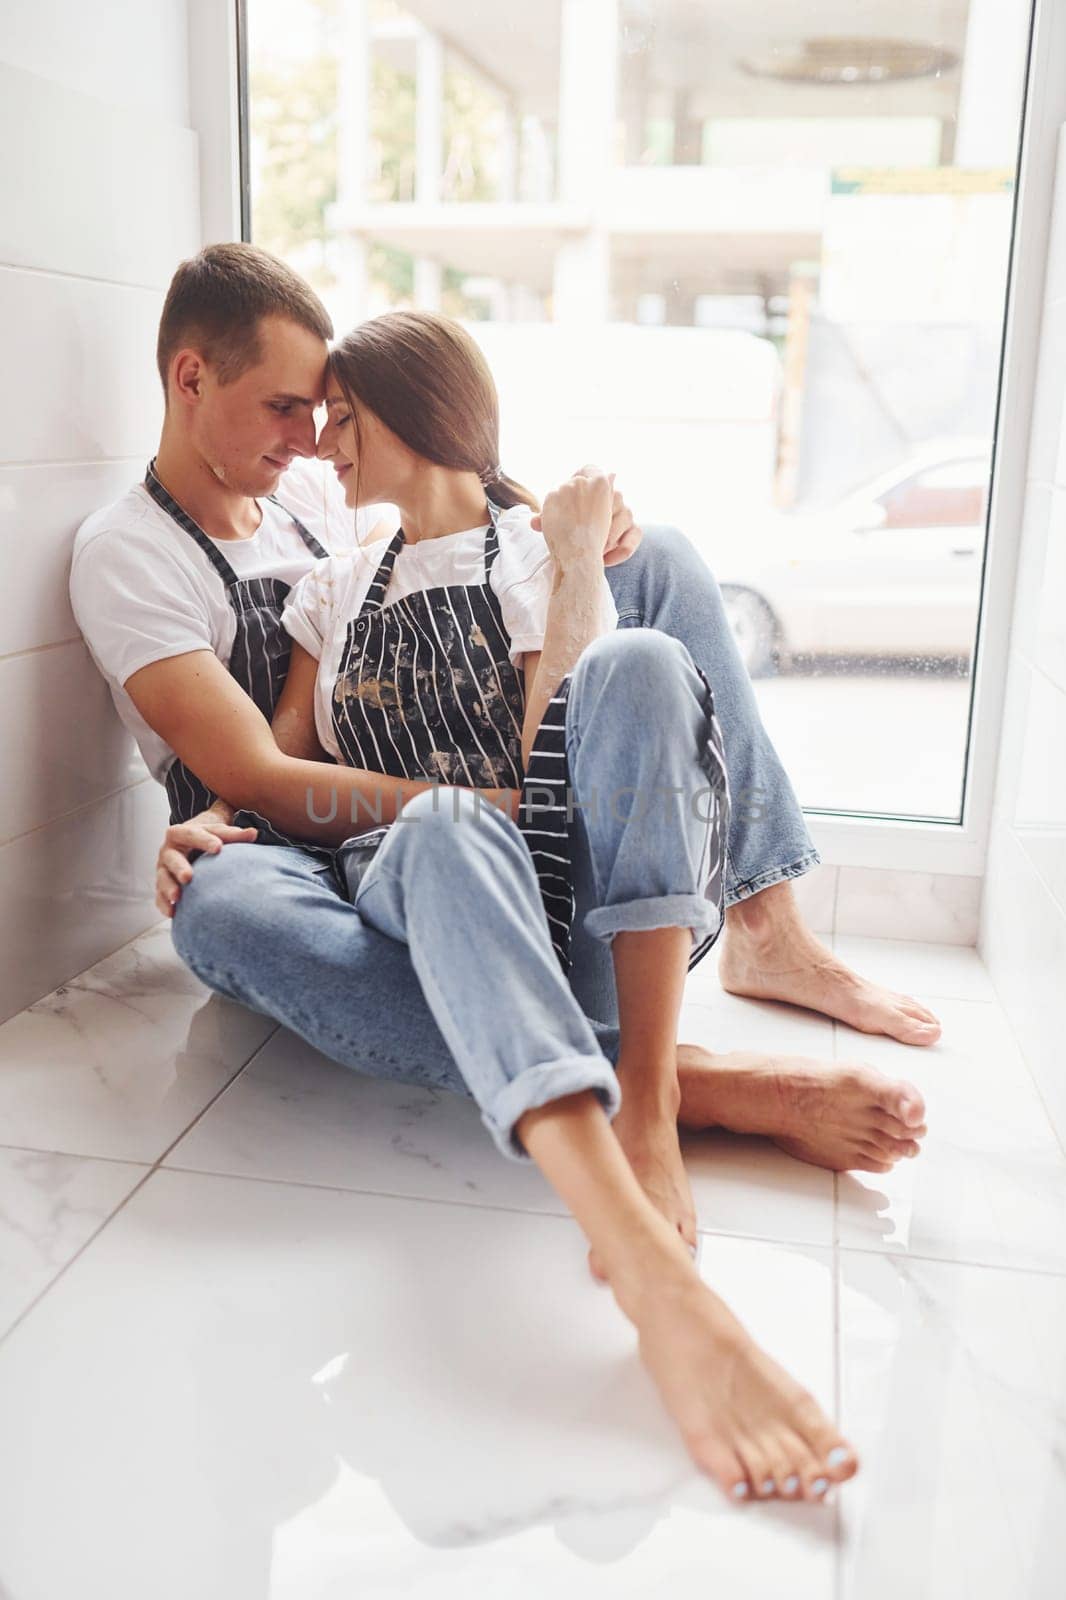 Cute young couple in jeans sitting down on the floor and embracing each other.